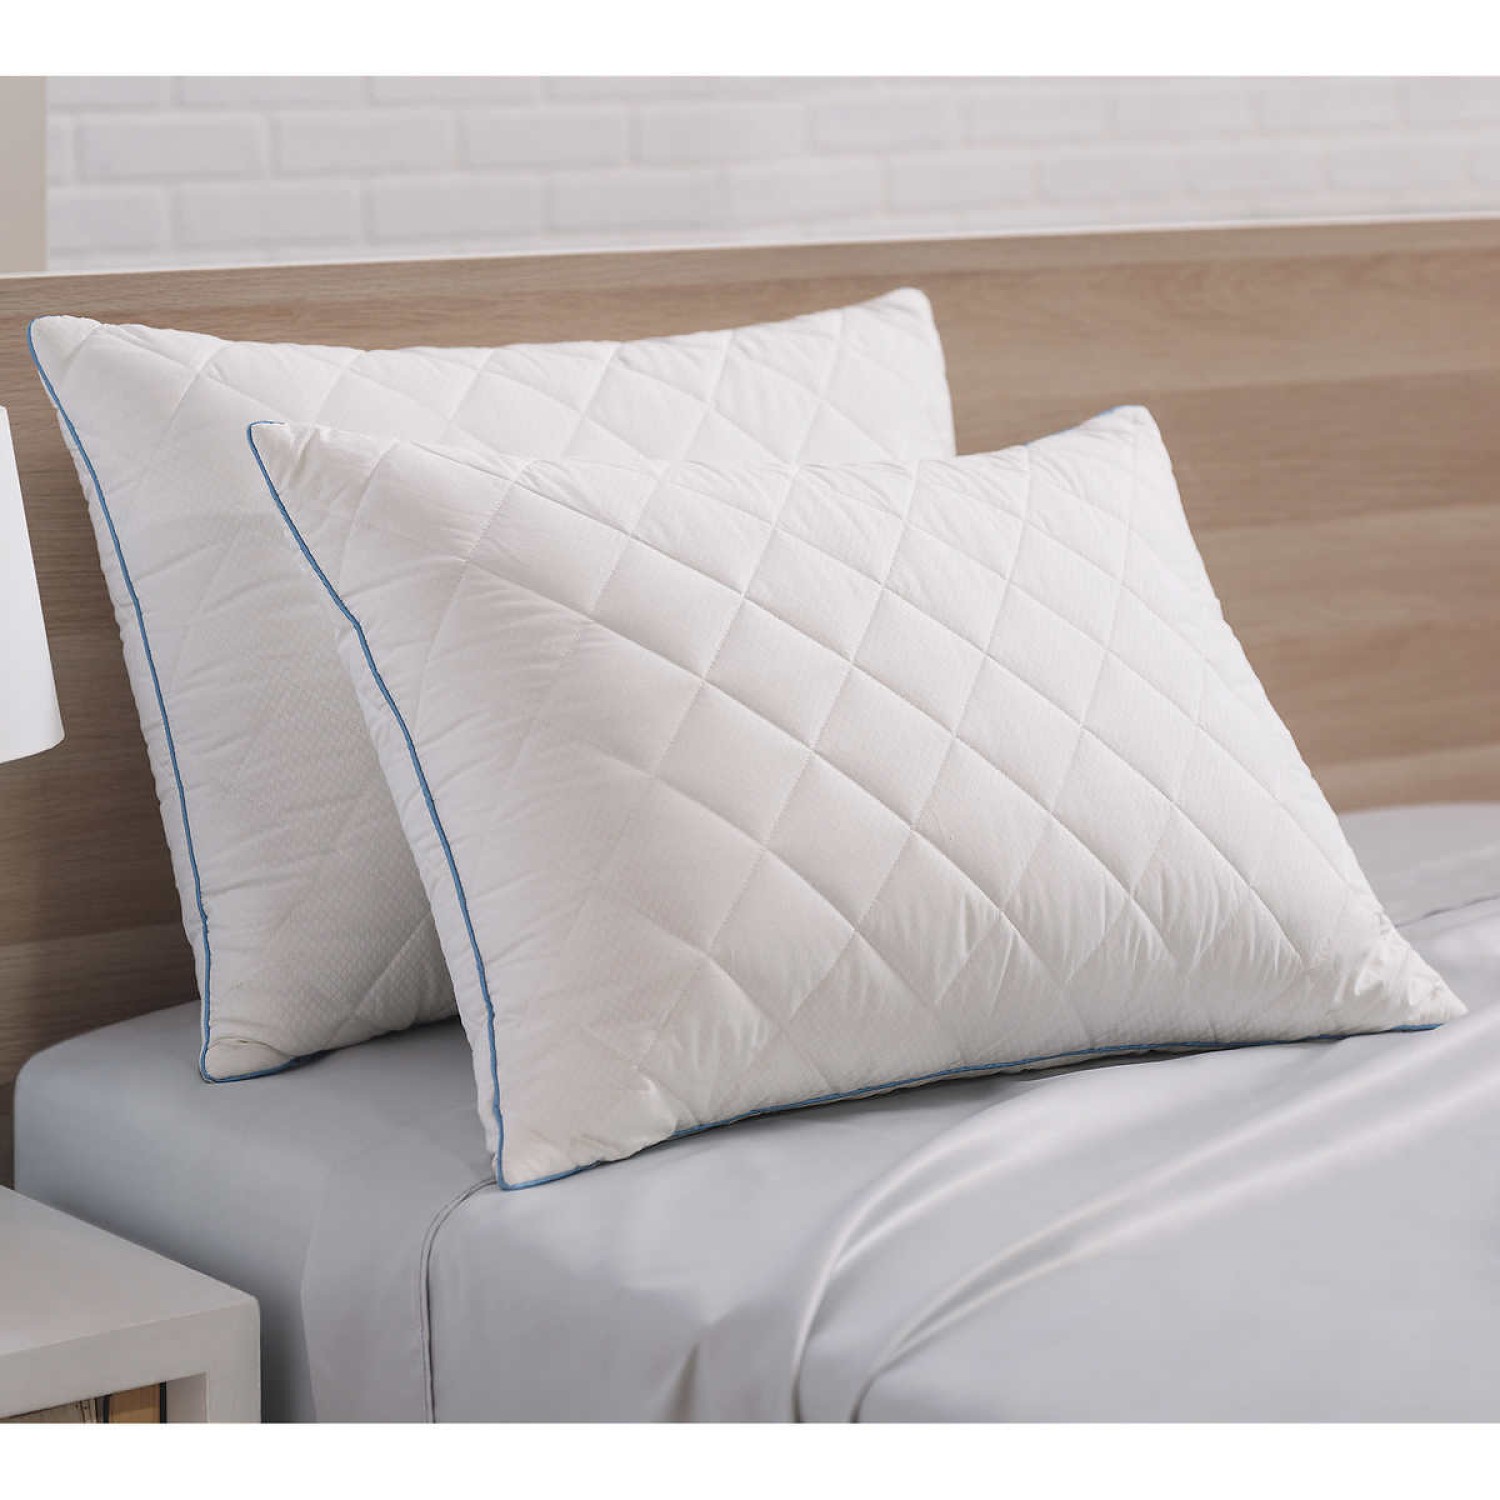 Weatherproof Vintage Home ClimaRest Triple Cooling Pillow, 2-pack, One ...